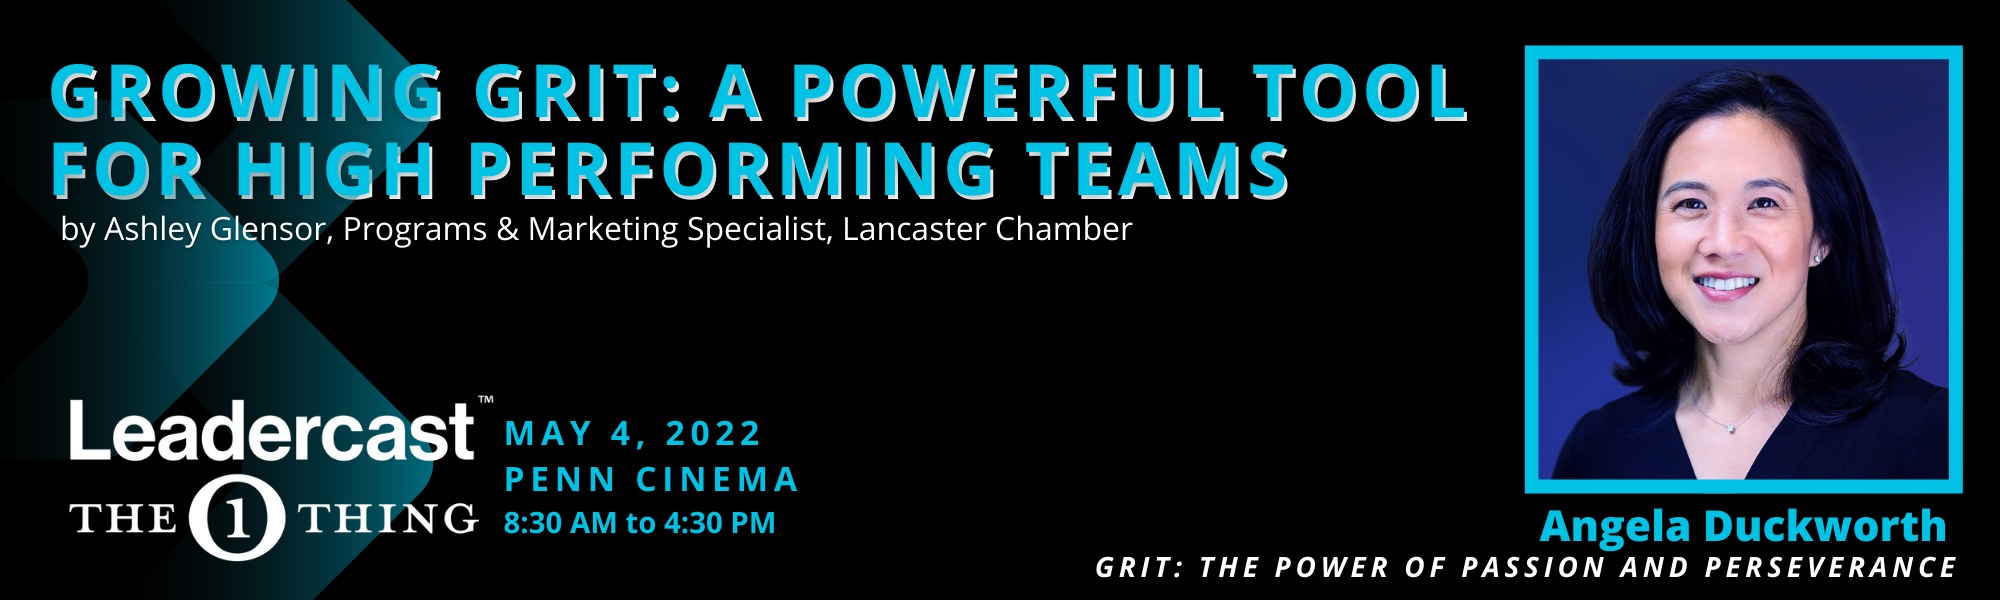 Growing Grit: A Powerful Tool for High Performing Teams